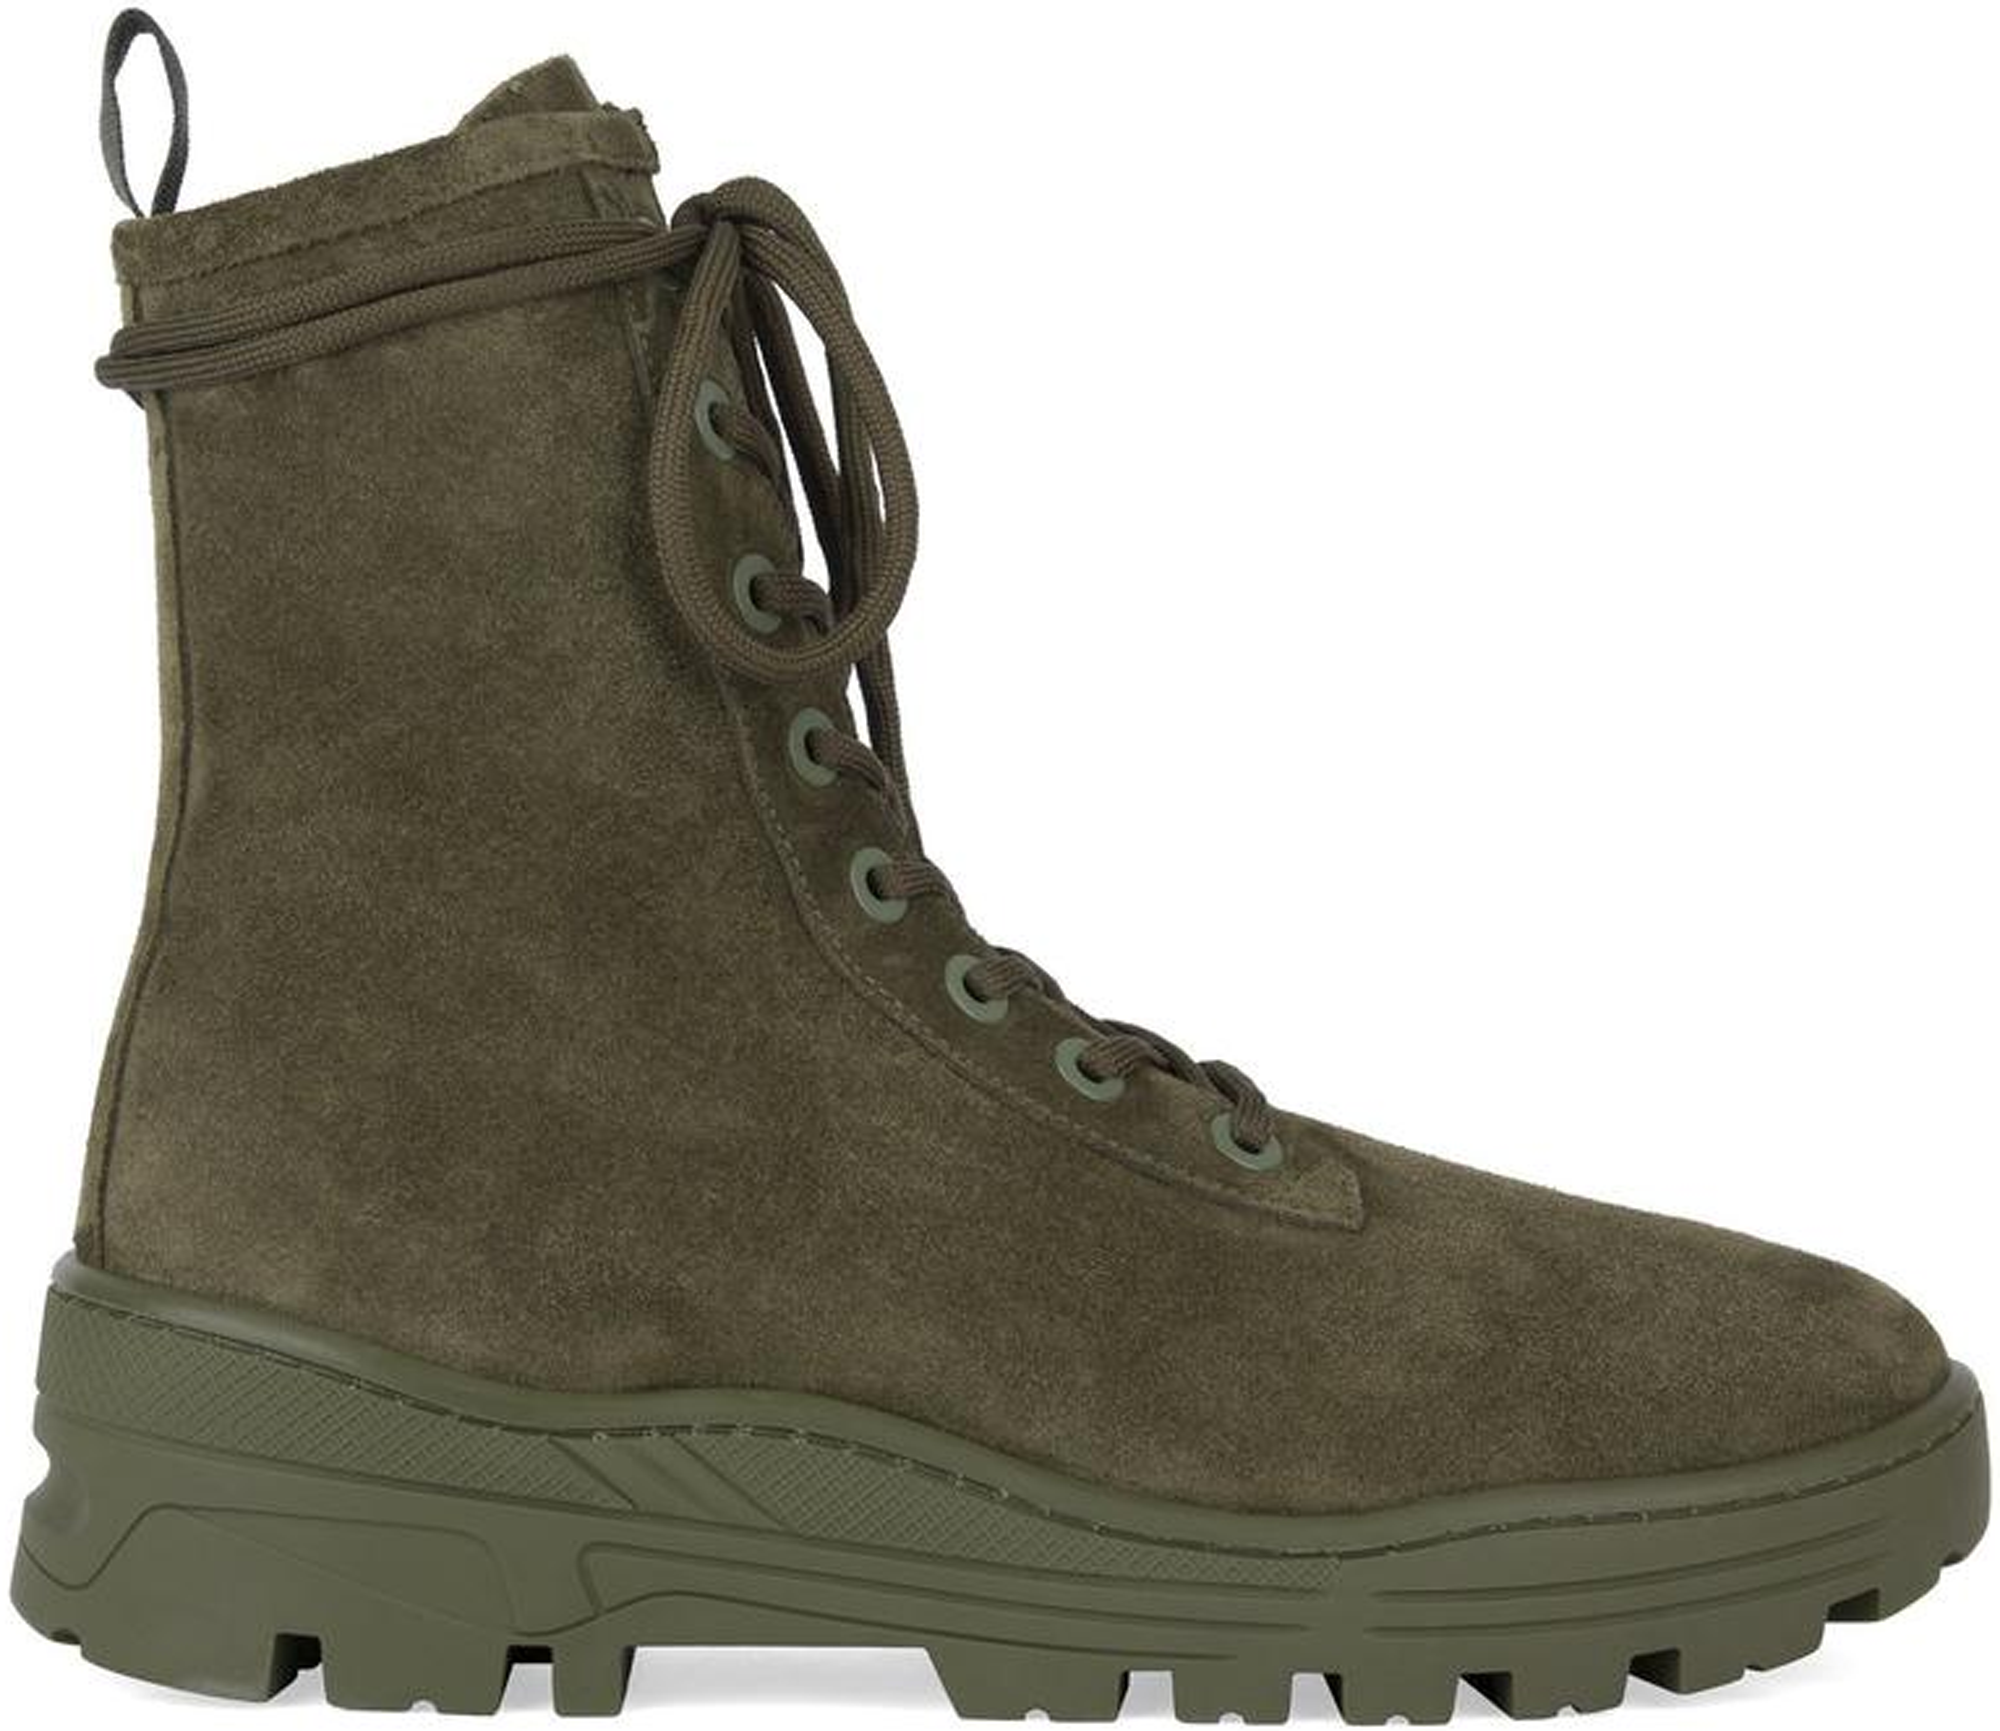 Yeezy Thick Suede Combat Boot Military 